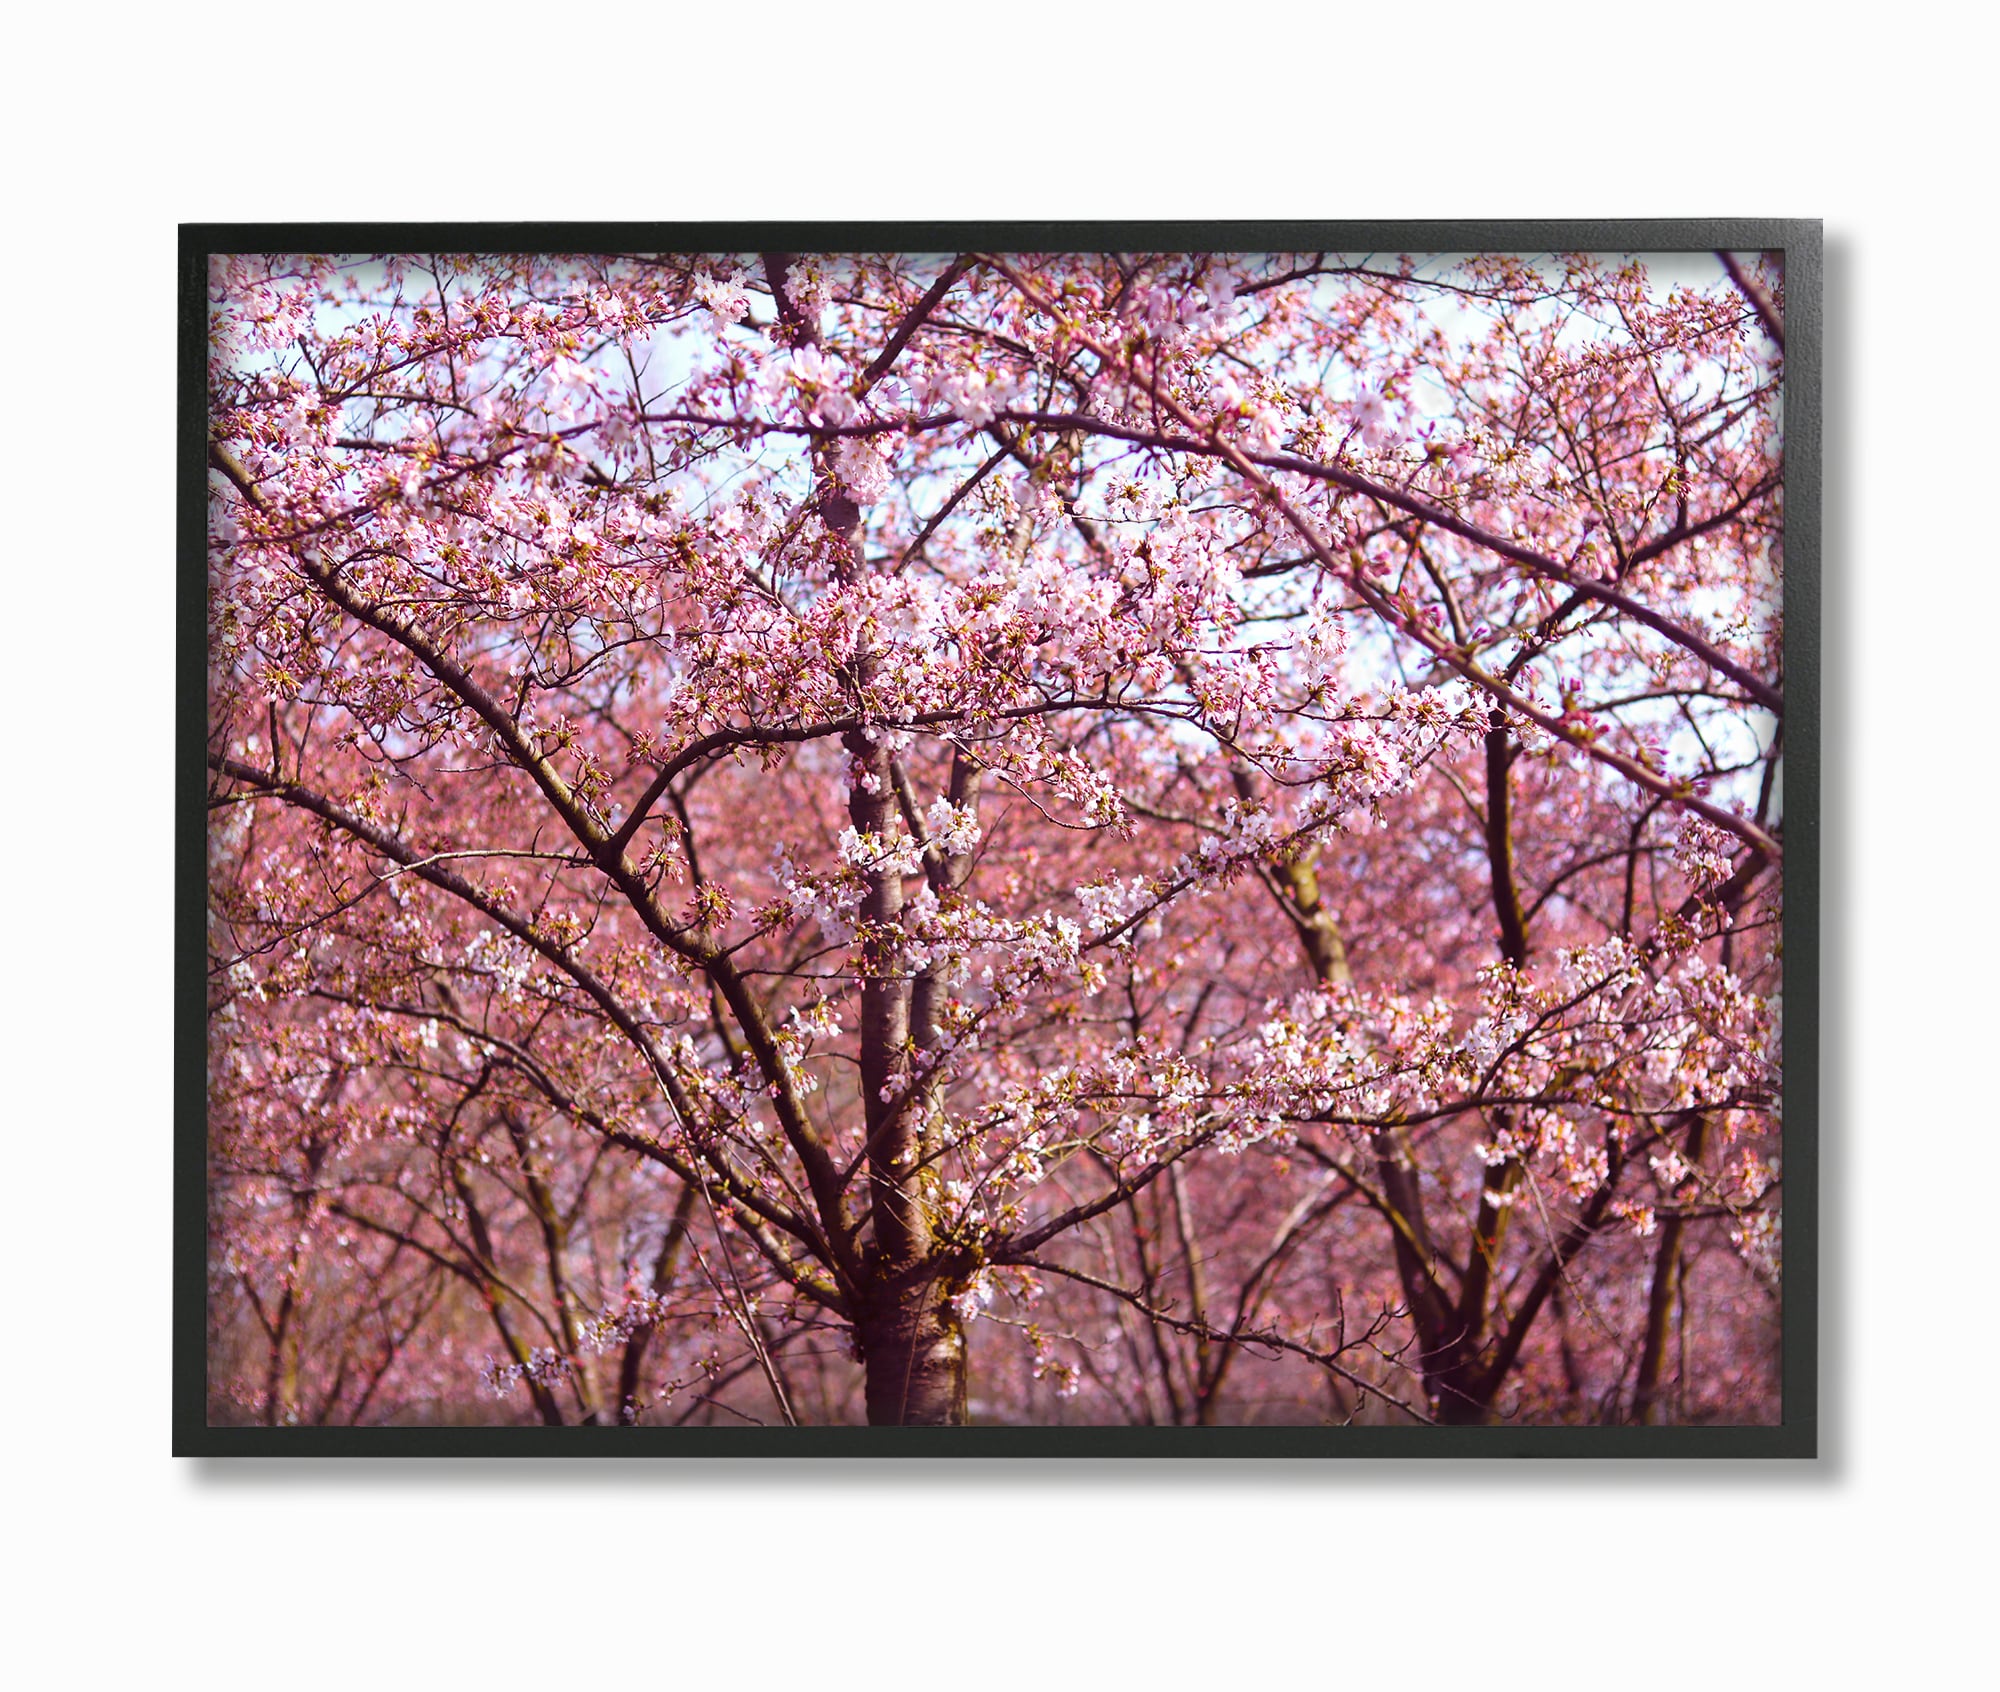 Pink Cherry Blossom Tree Sky View Canvas Prints Painting Wall Art Decor Picture 